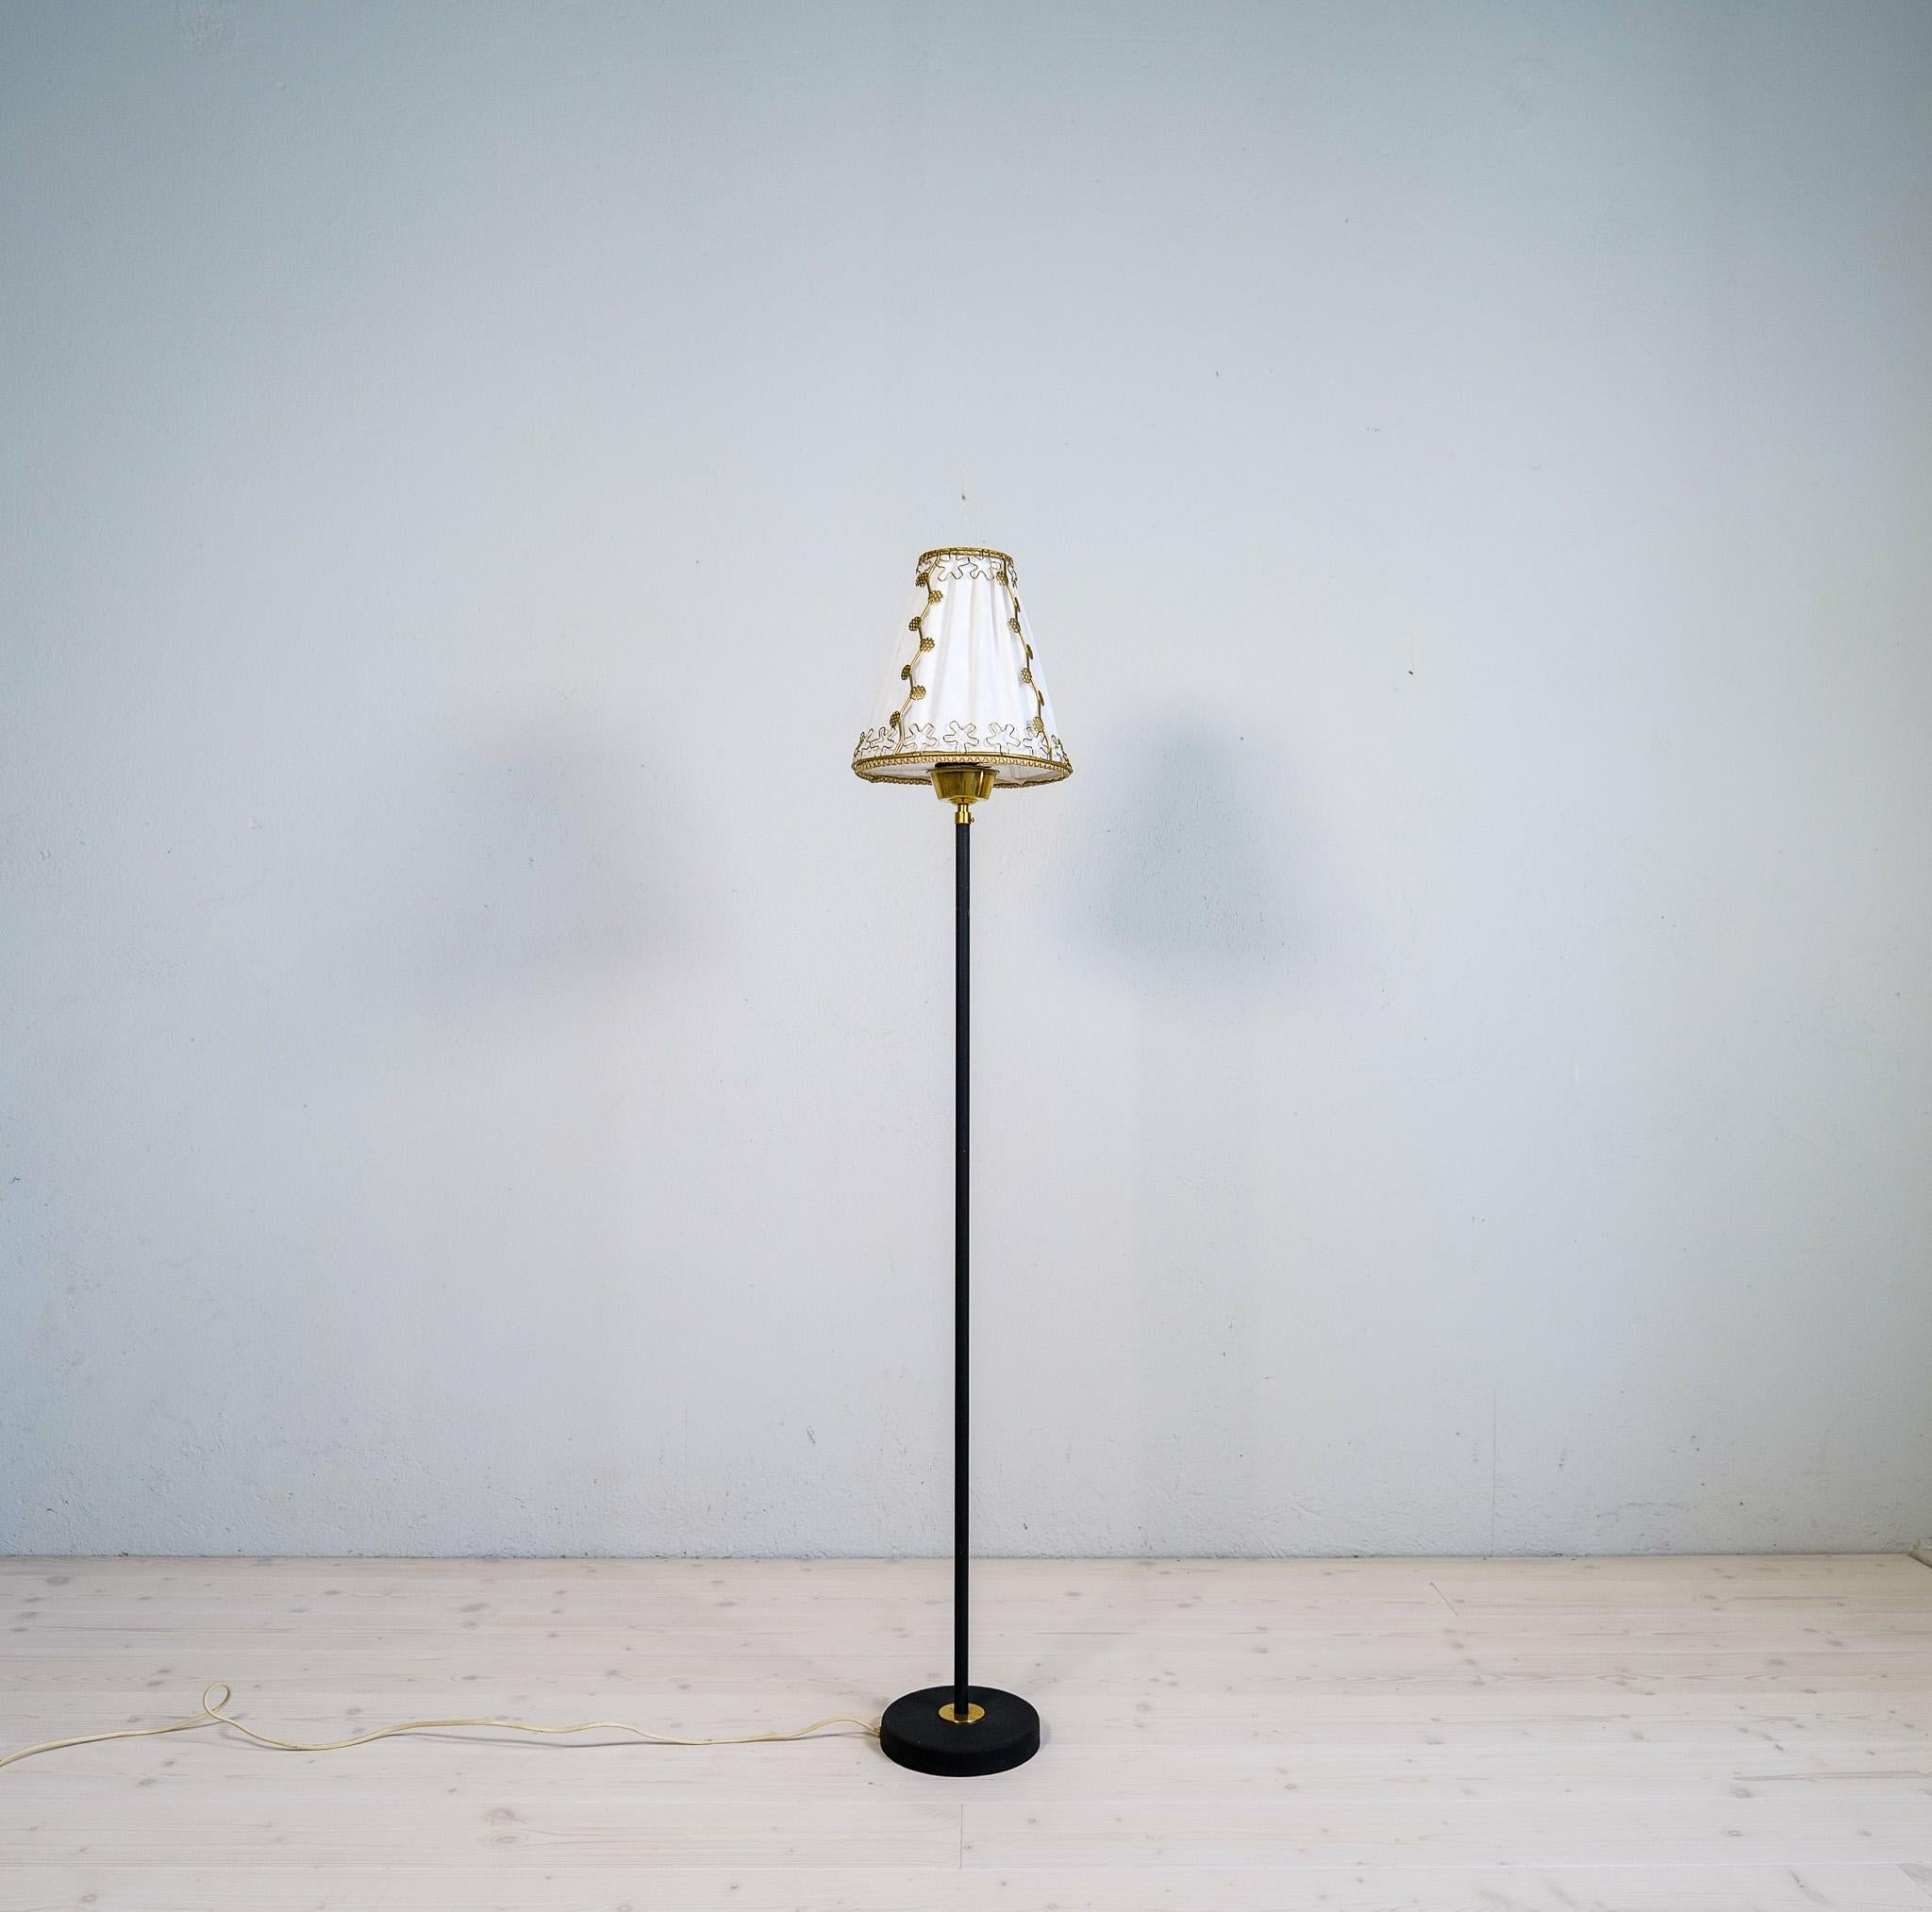 Minimalistic floor lamp Designed by Eric Wärnå in Sweden during the 1960s. This lamp features a cast iron base with brass details. The shade is made in cotton and with wonderful small parts in brass to give a great impression of that 50-60s Swedish